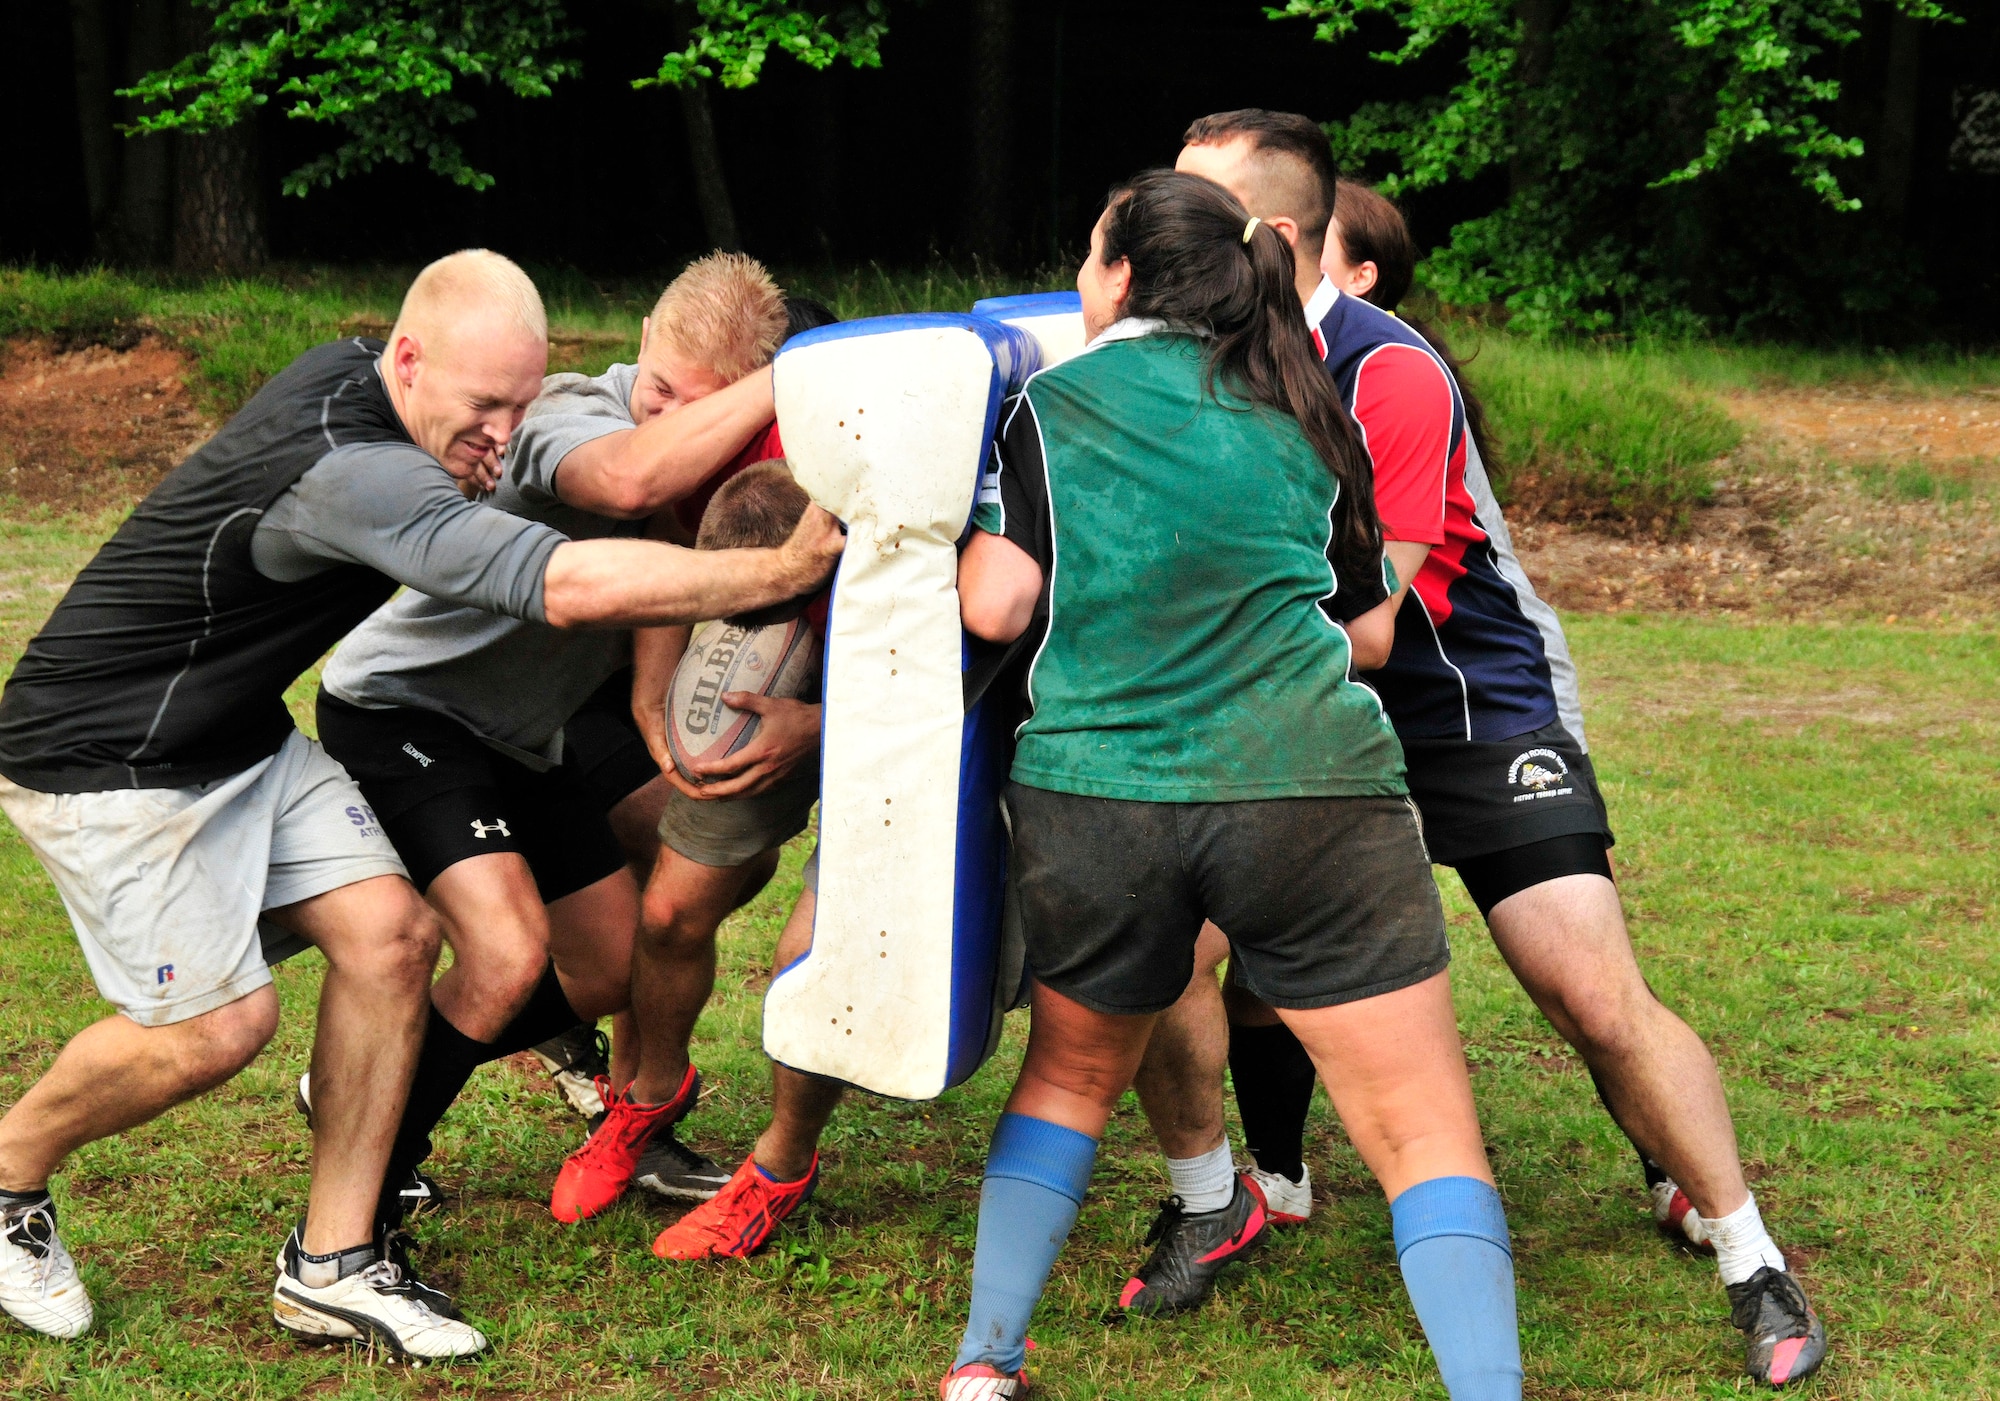 Members of the Ramstein Rogues collide during a ruck drill during a preseason practice at the 435th Construction Training Squadron rugby pitch at Ramstein Air Base, Germany, July 12, 2012. The Rogues have two men's teams and one women's team consisting of Host Nation players, British Royal Air Force and U.S. military Soldiers, Airmen from the Kaiserslautern area and dependents. (U.S. Air Force photo/Airman 1st Class Trevor Rhynes)
